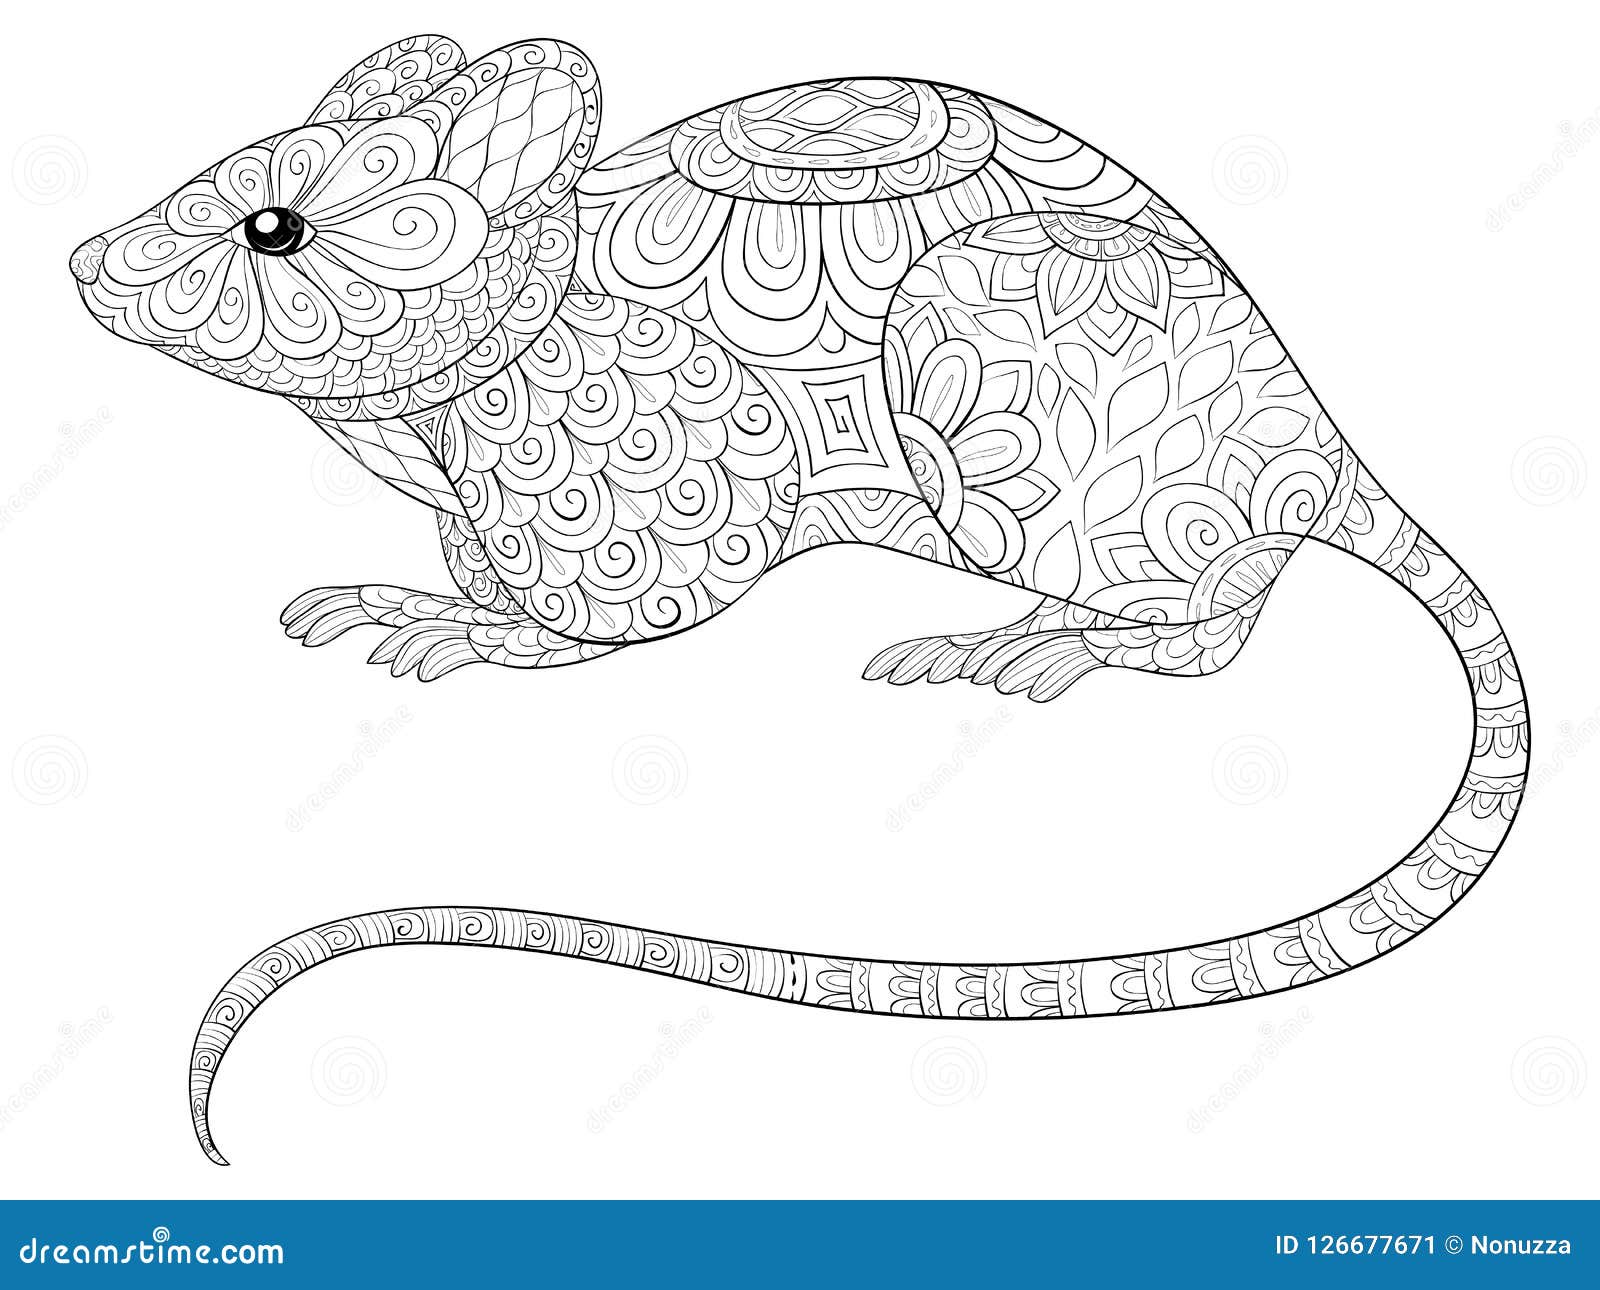 Adult Coloring Book,page a Cute Rat Image for Relaxing. Stock ...